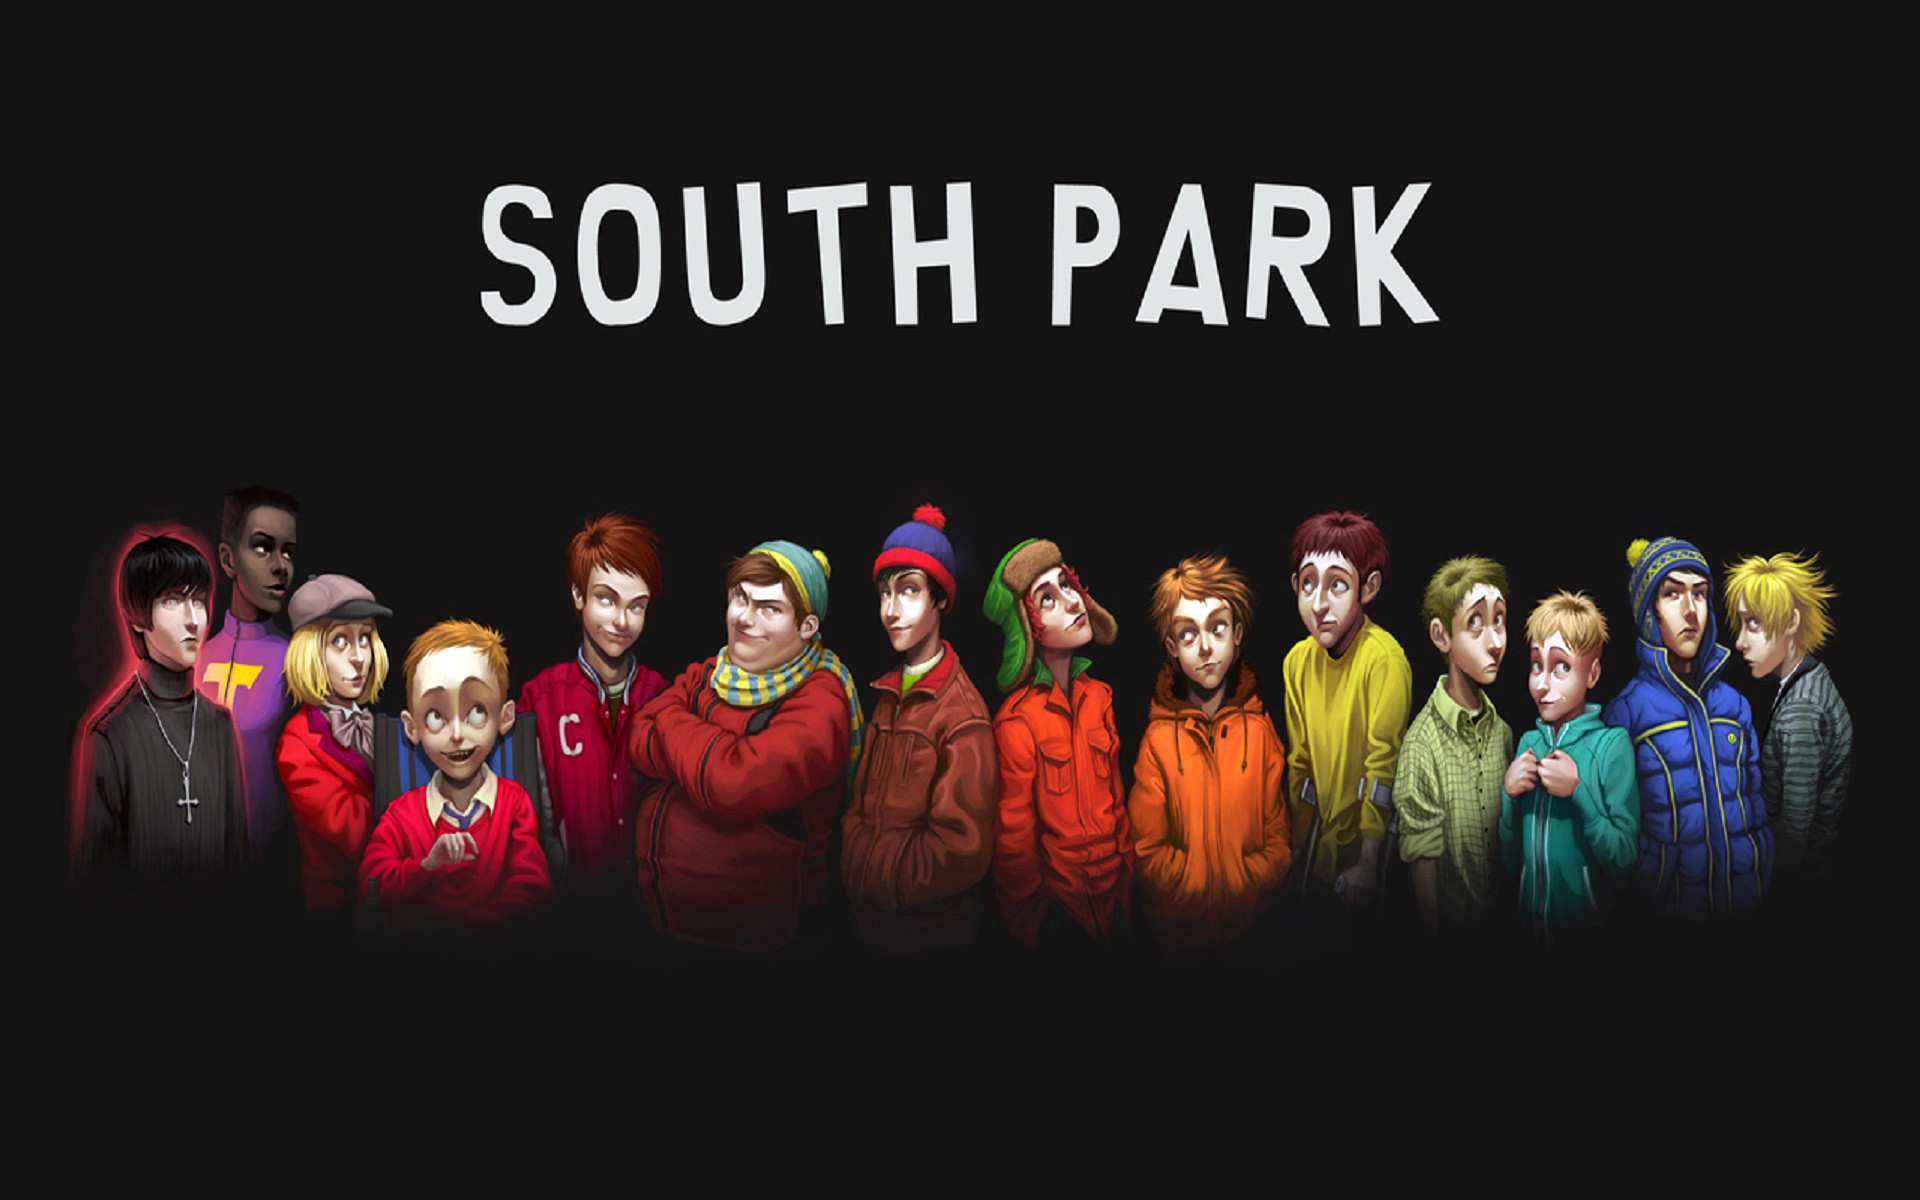 Realistic South Park Characters Cleanup Of Original